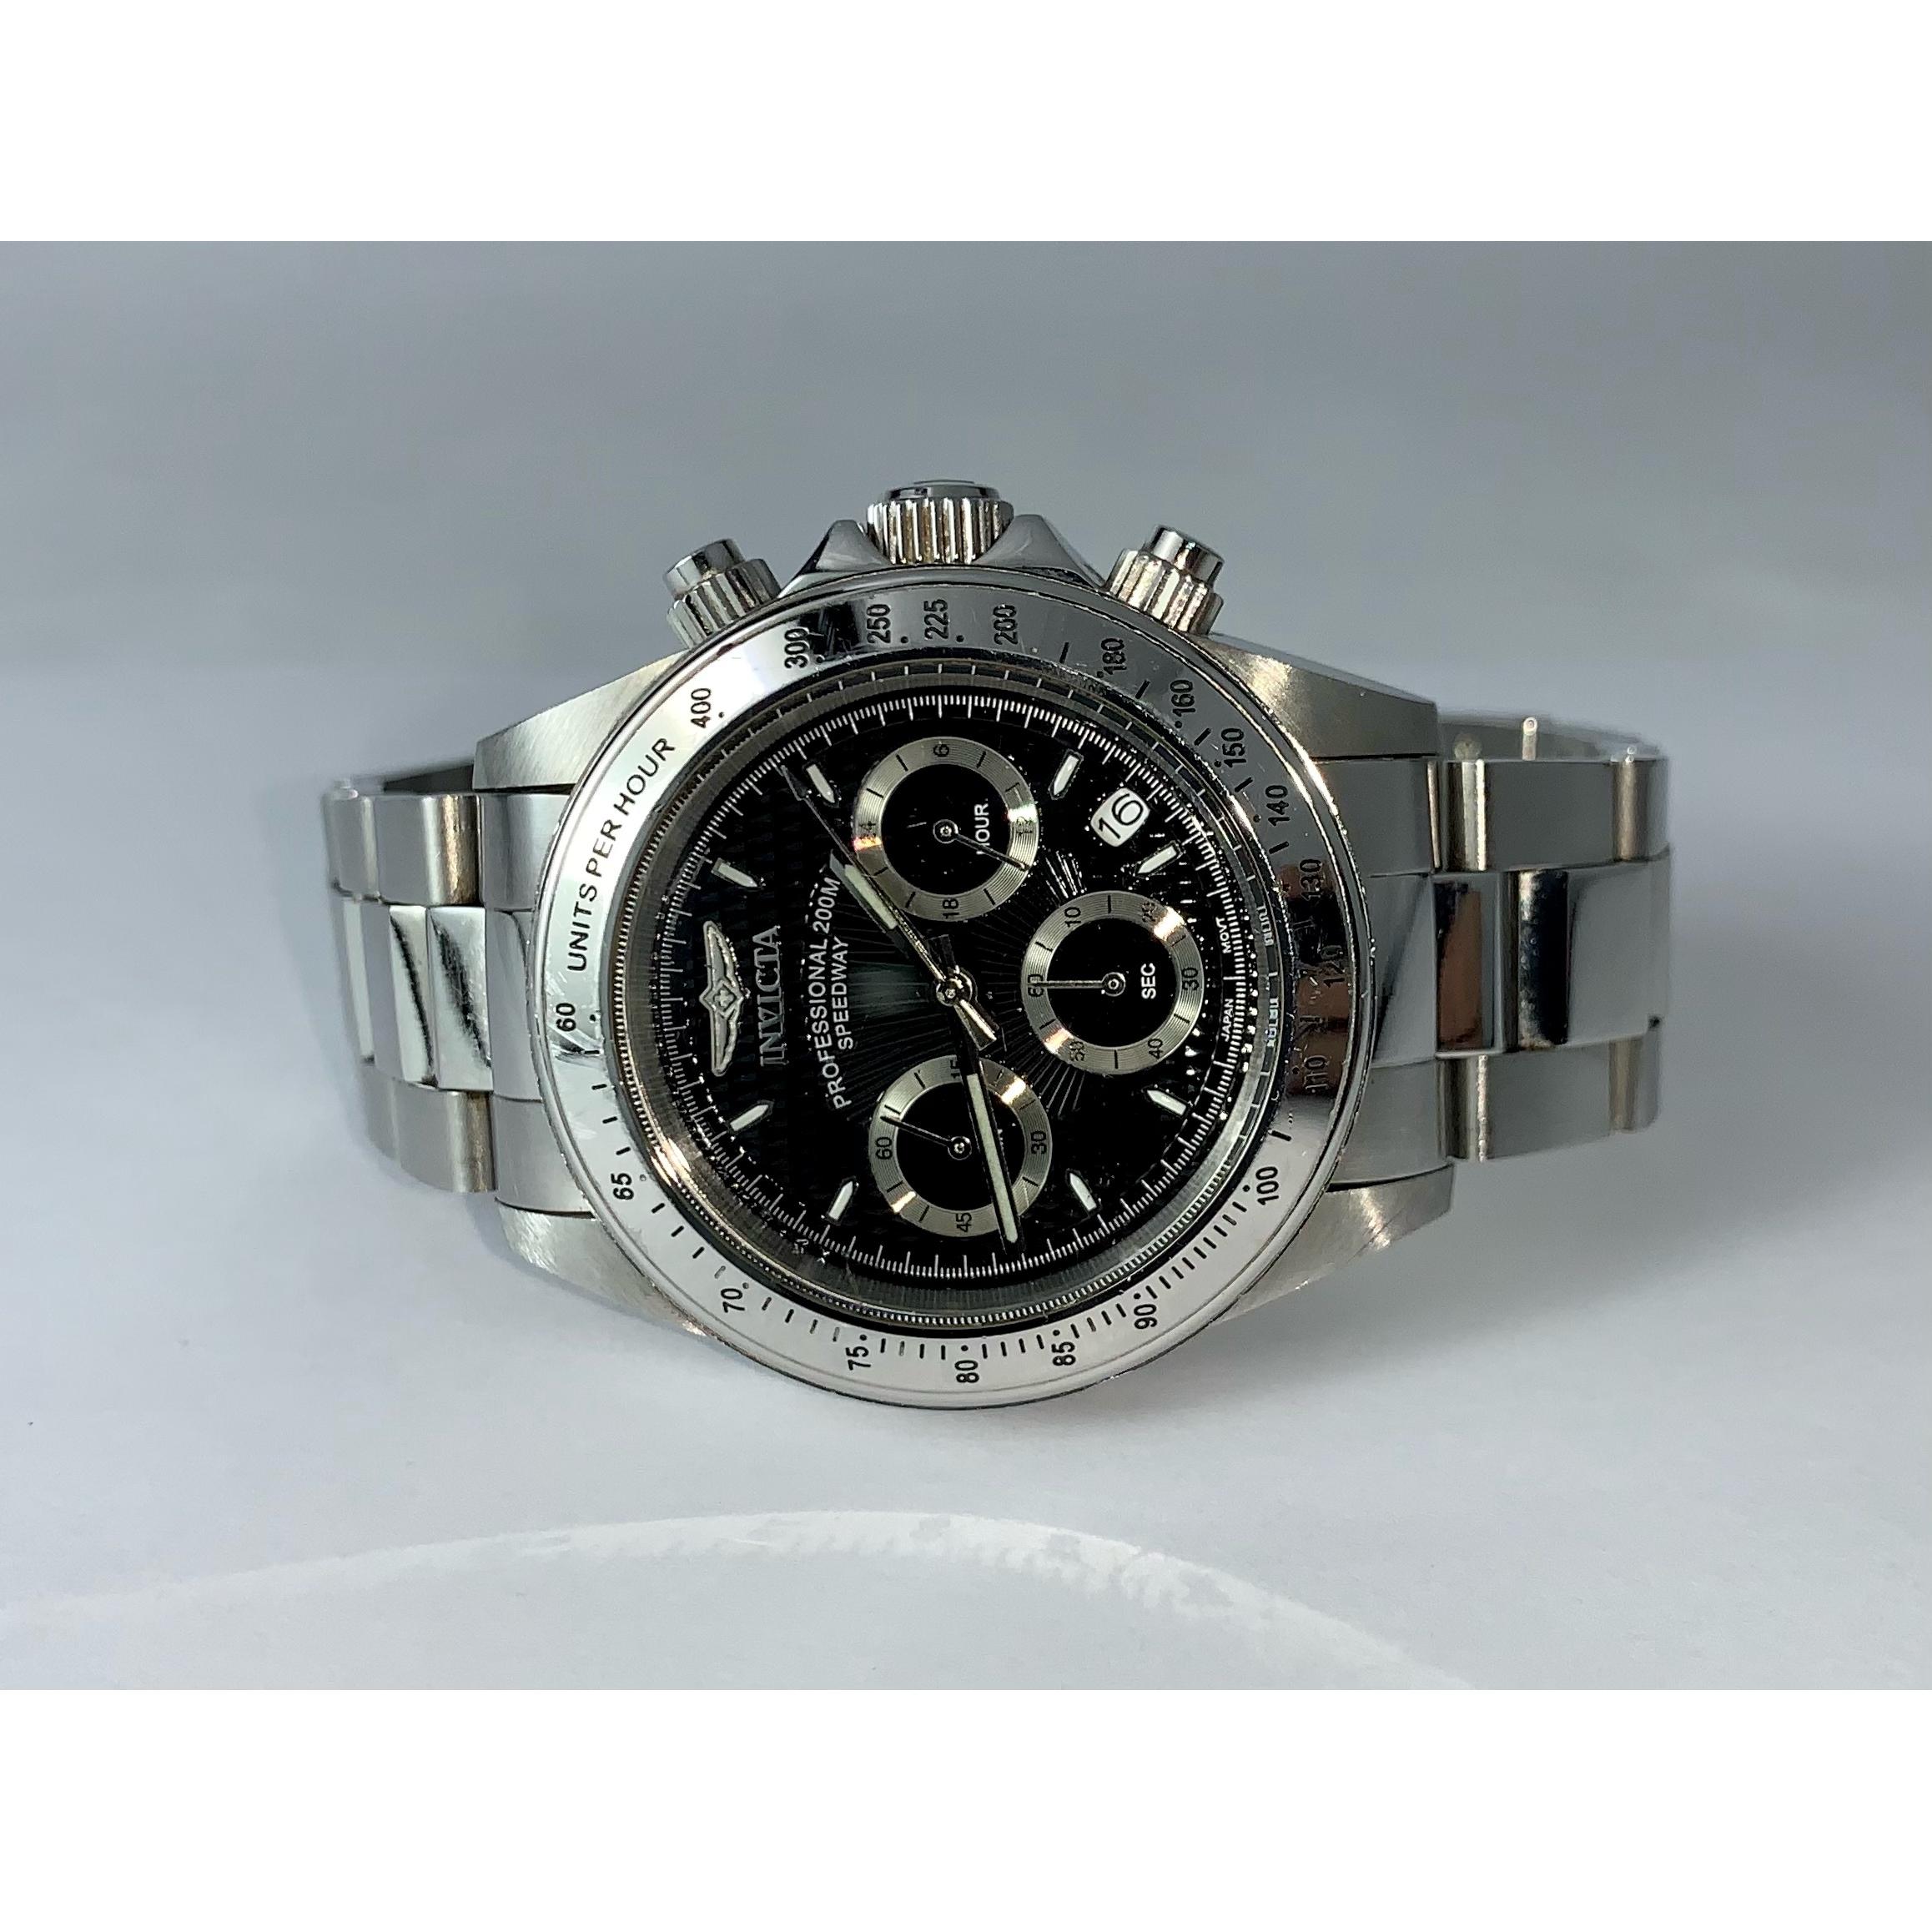 Invicta Professional Speedway Chronograph Stainless Steel Watch 9223 Barry's Pawn and